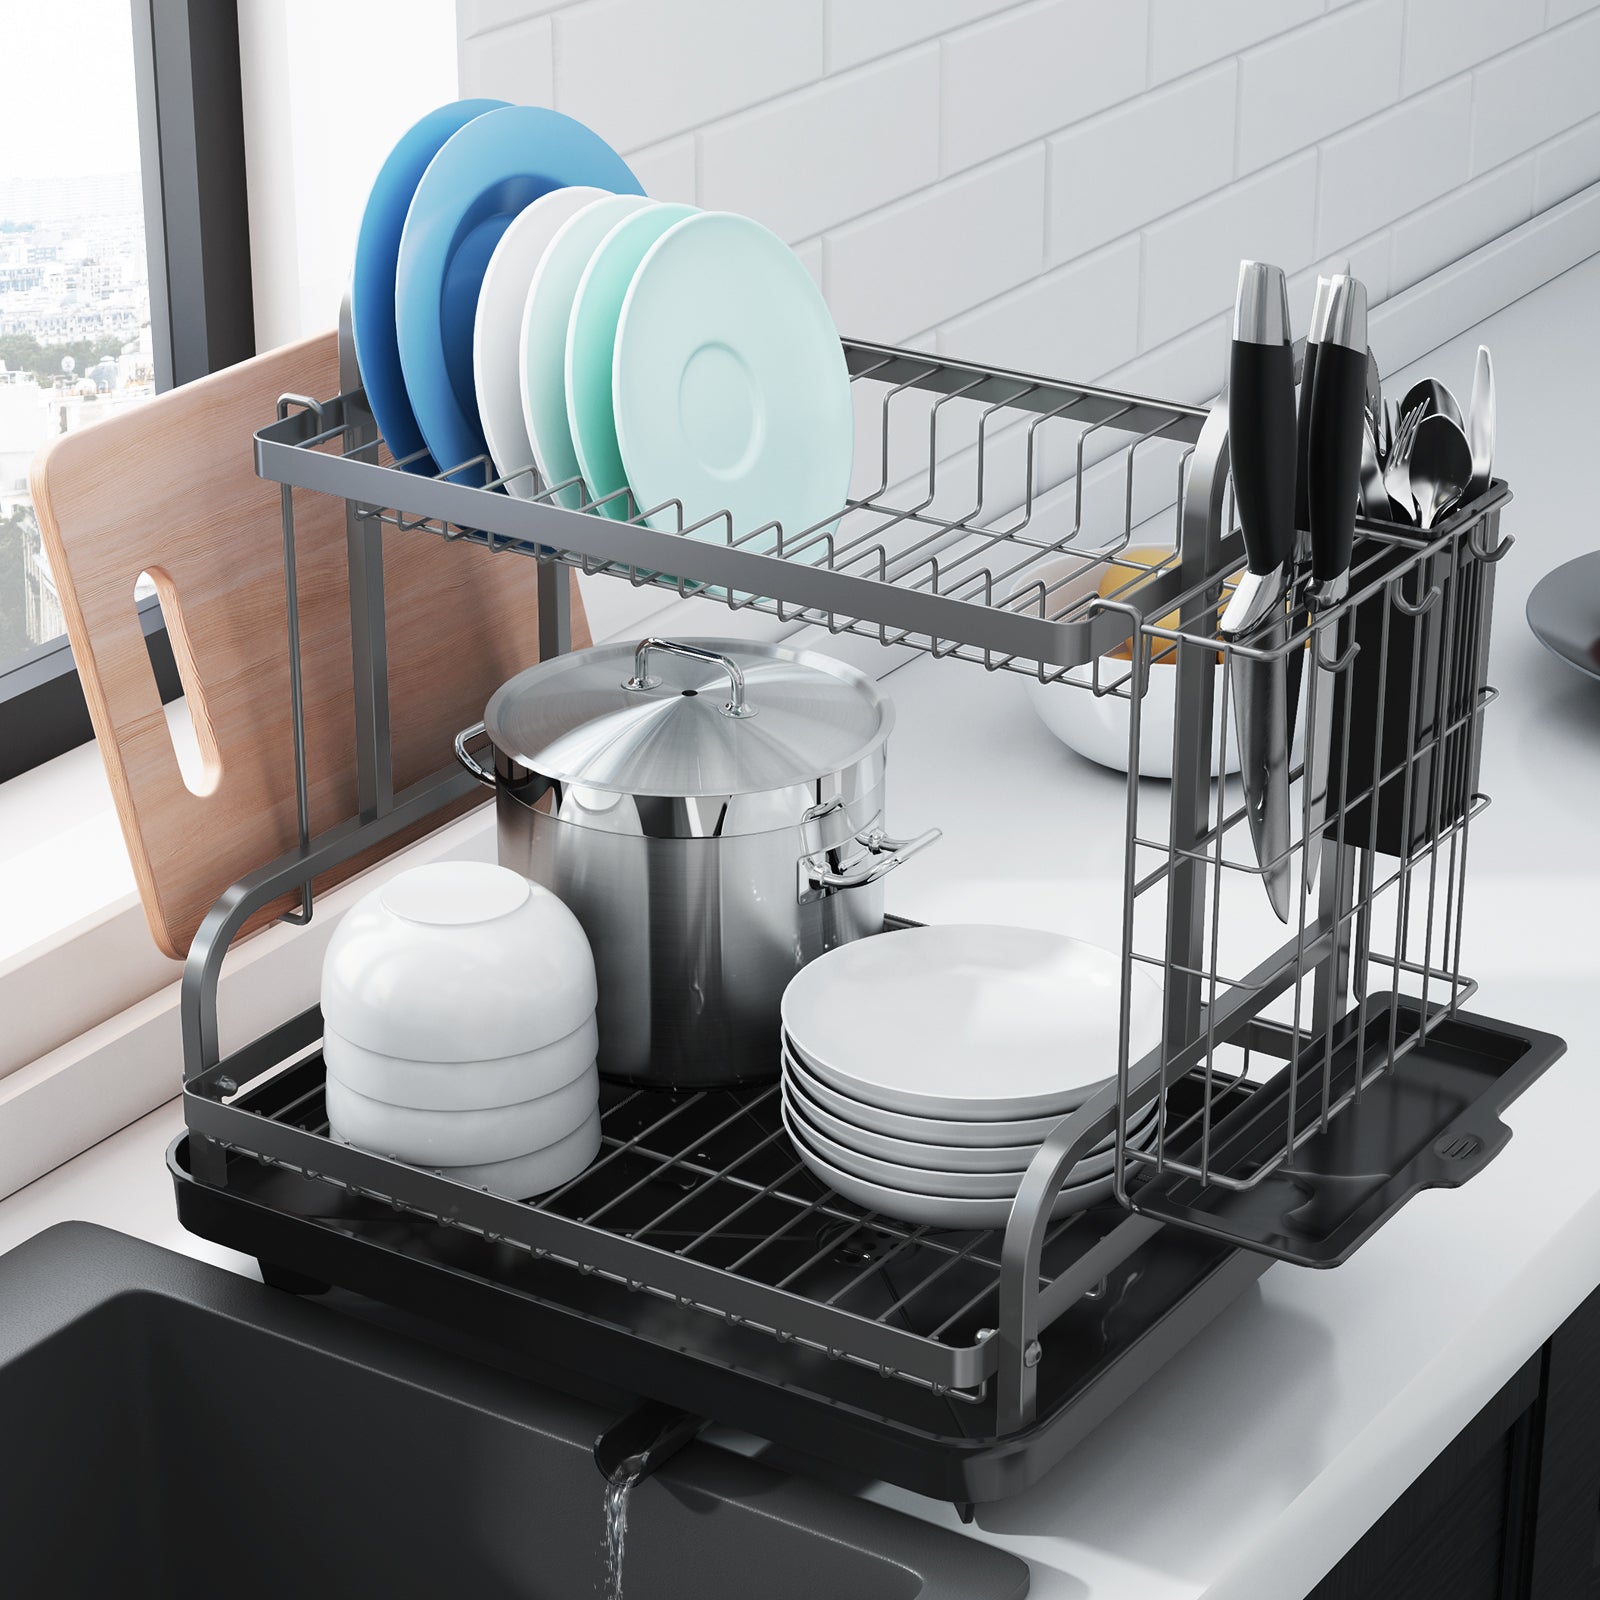 Kitsure Large Dish Drying Rack - Extendable Dish Rack, Multifunctional Dish  Rack for Kitchen Counter, Anti-Rust Drying Dish Rack with Cutlery & Cup